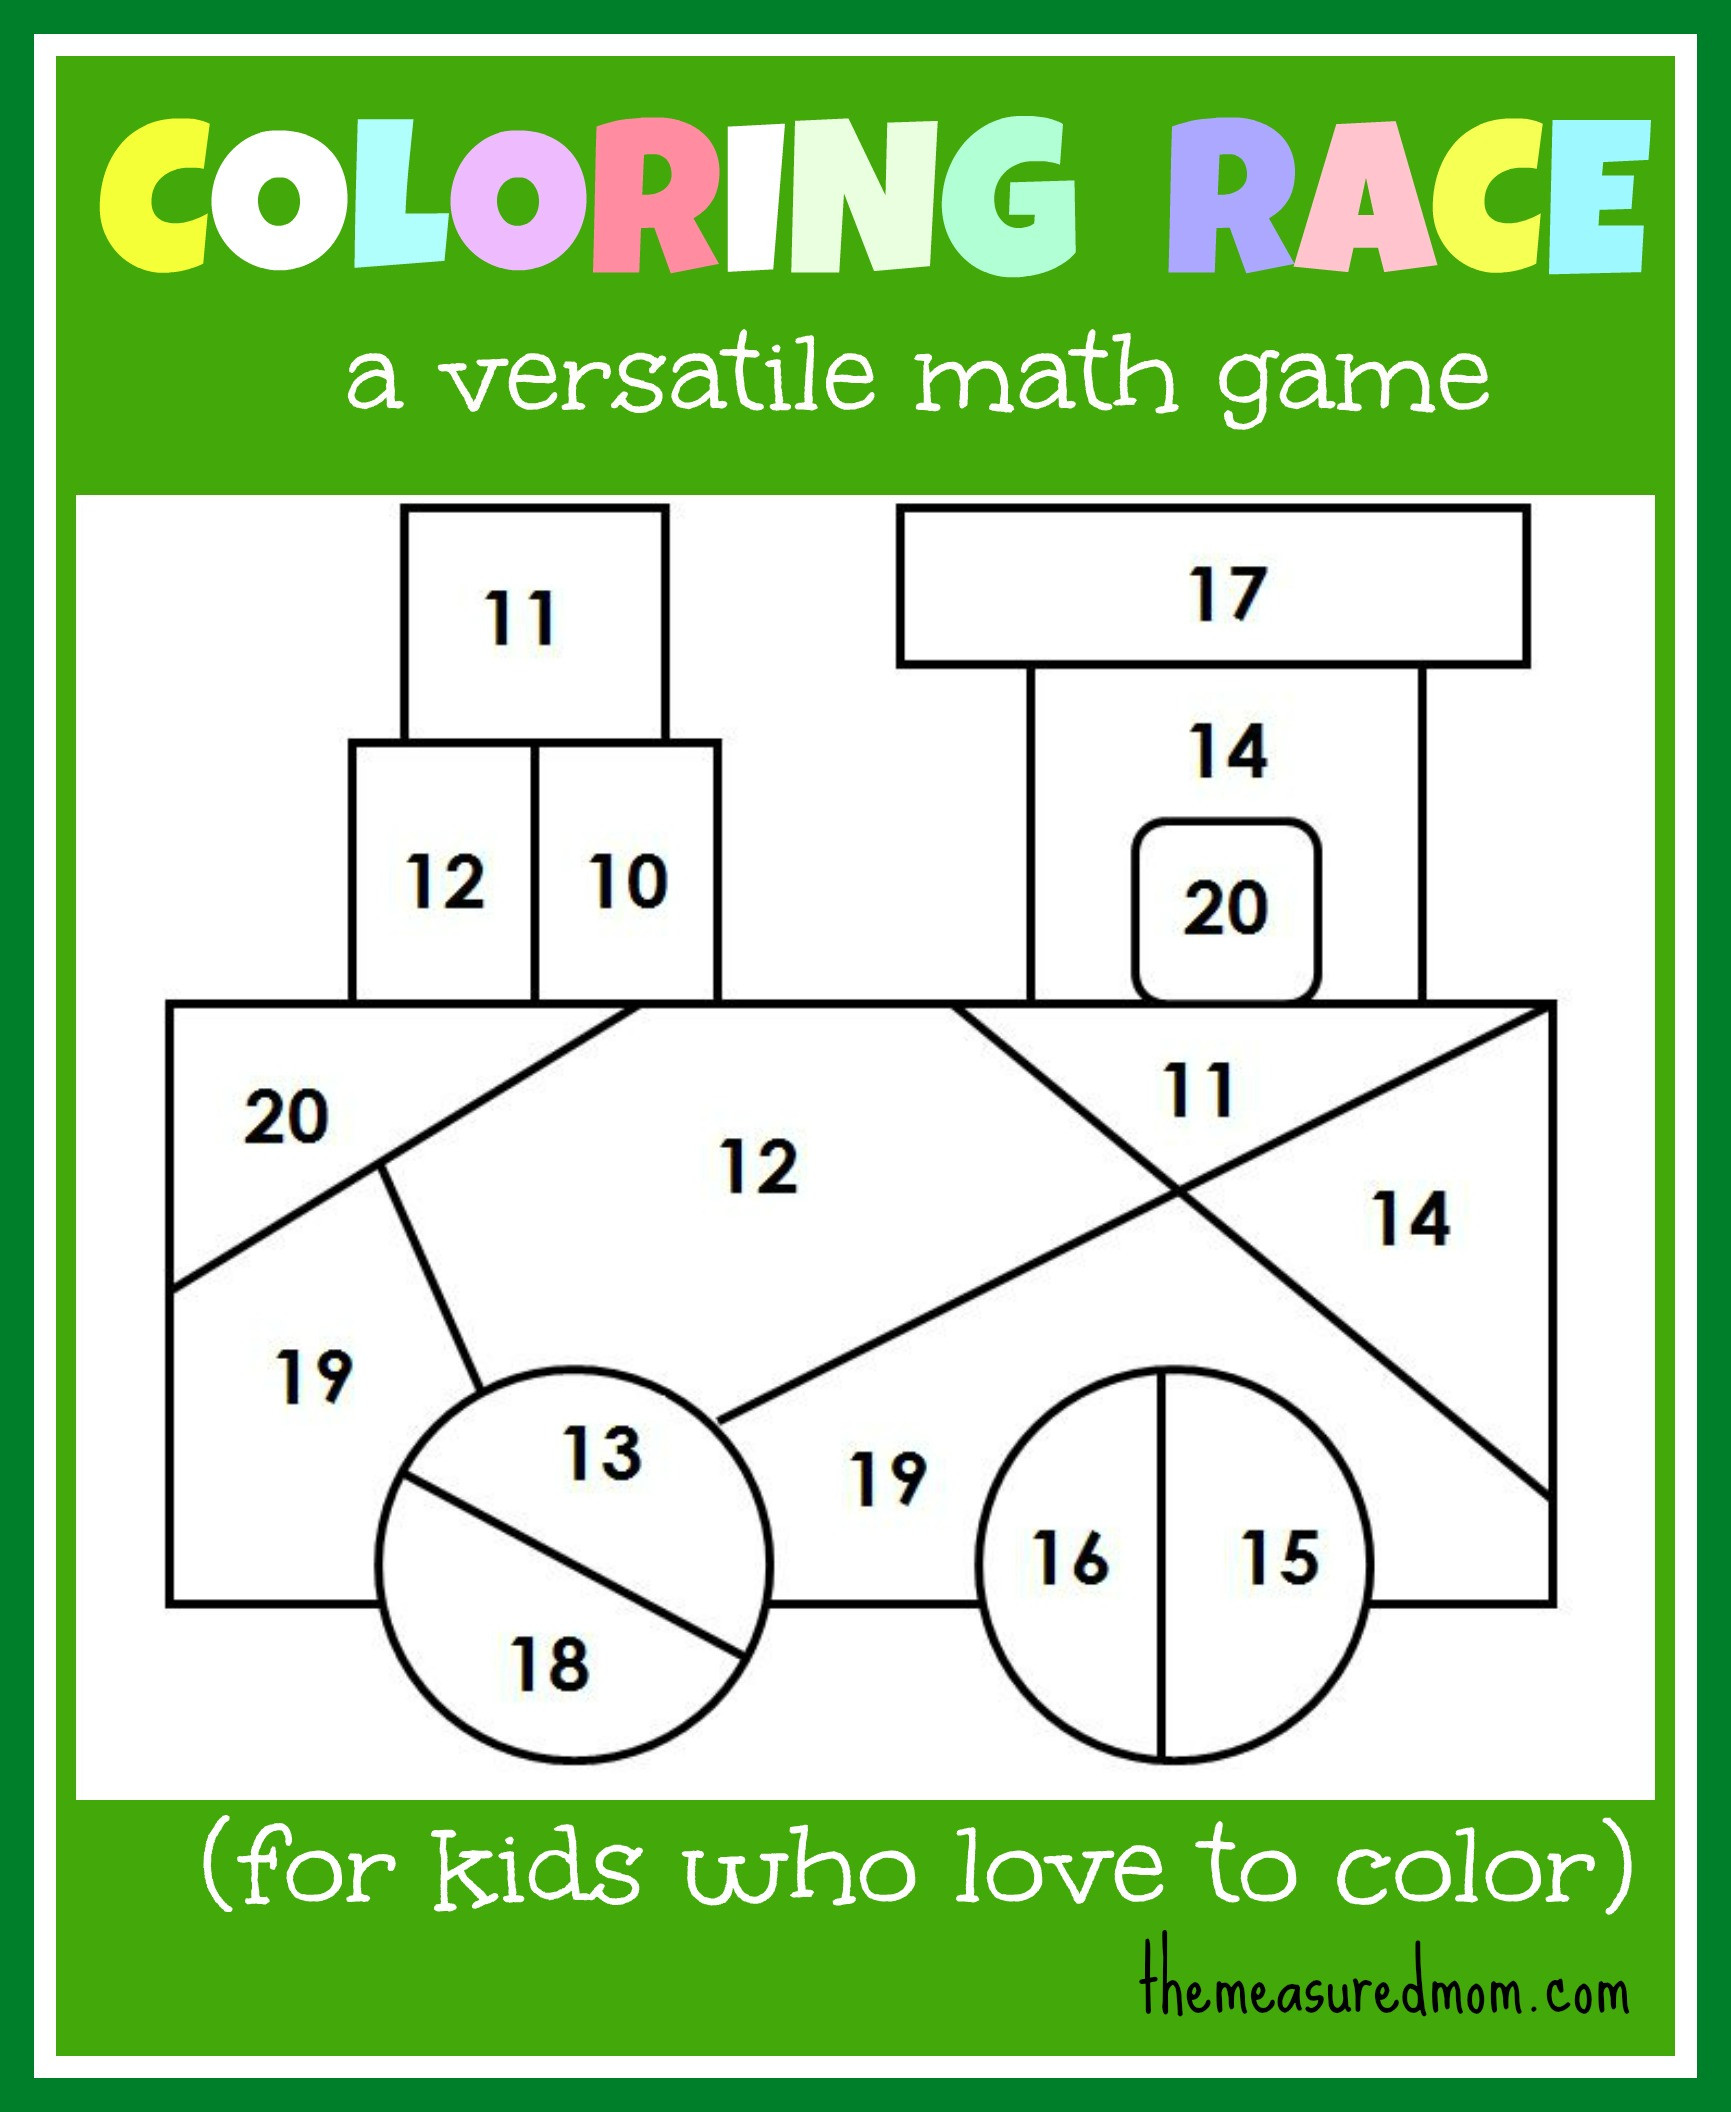 Coloring Games For Kids
 Math game for kids Coloring Race bines math and